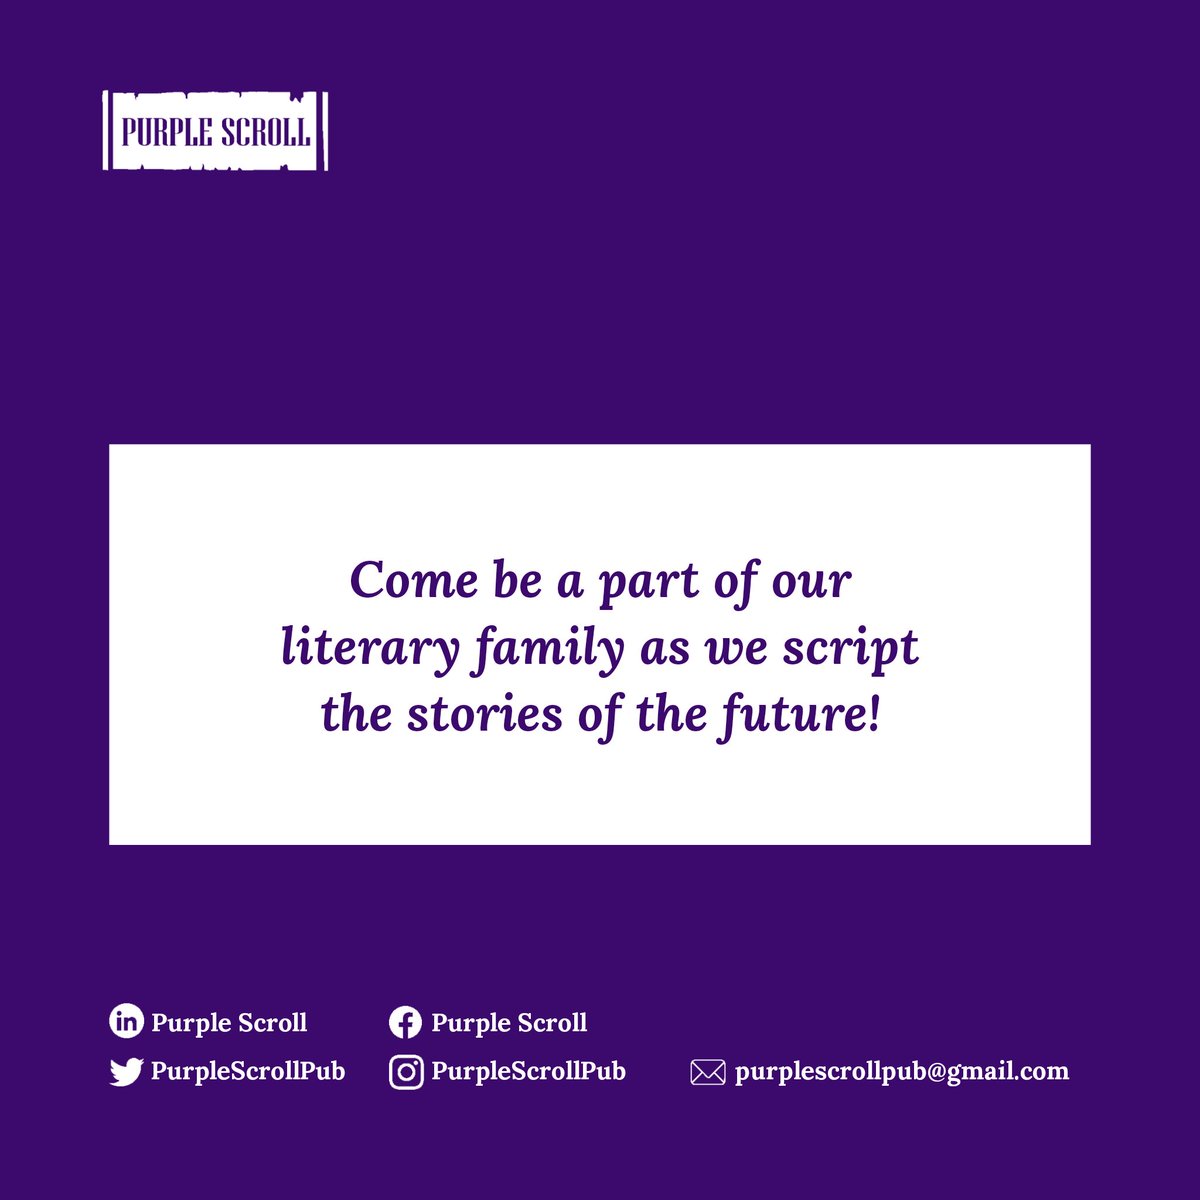 We are a publishing house dedicated to giving voice to the words of history-makers and prestigious minds, as well as the stories that shape our world.

Welcome to our Purple World!

#publishinghouse #publishing #publisher #books #nigerianbooks #nigerianauthors #africanauthors